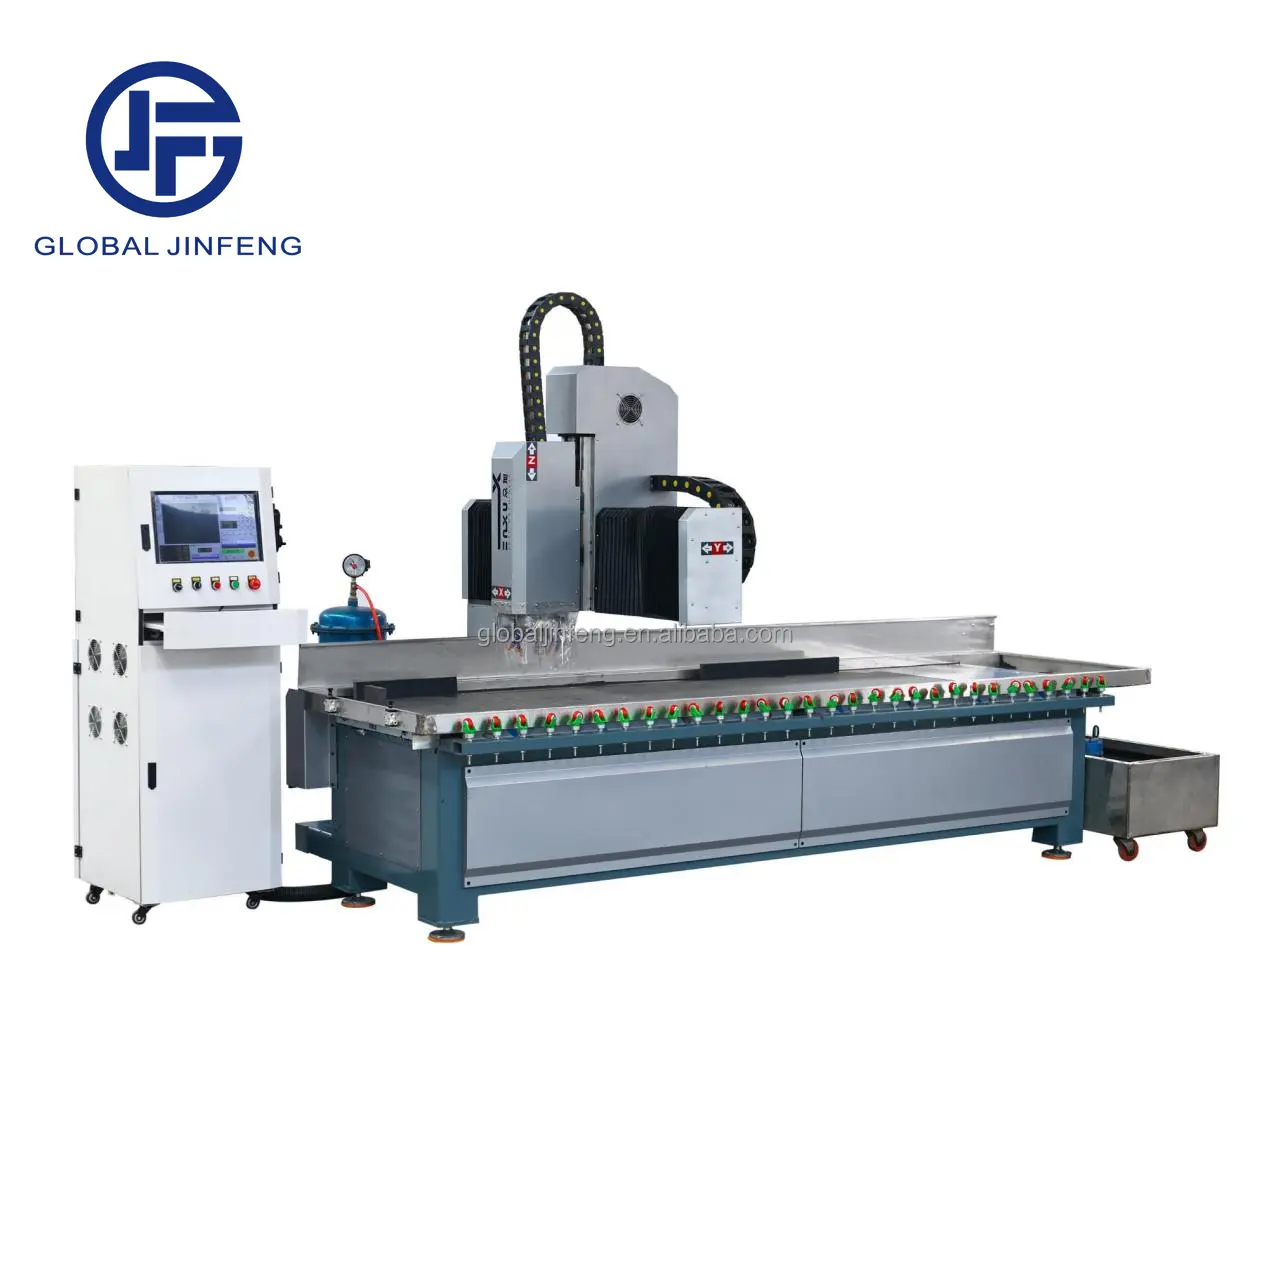 JF CNC-1510 CNC Router Glass Milling Hole Drilling Cutting Machine Multi-function Processing Machinery